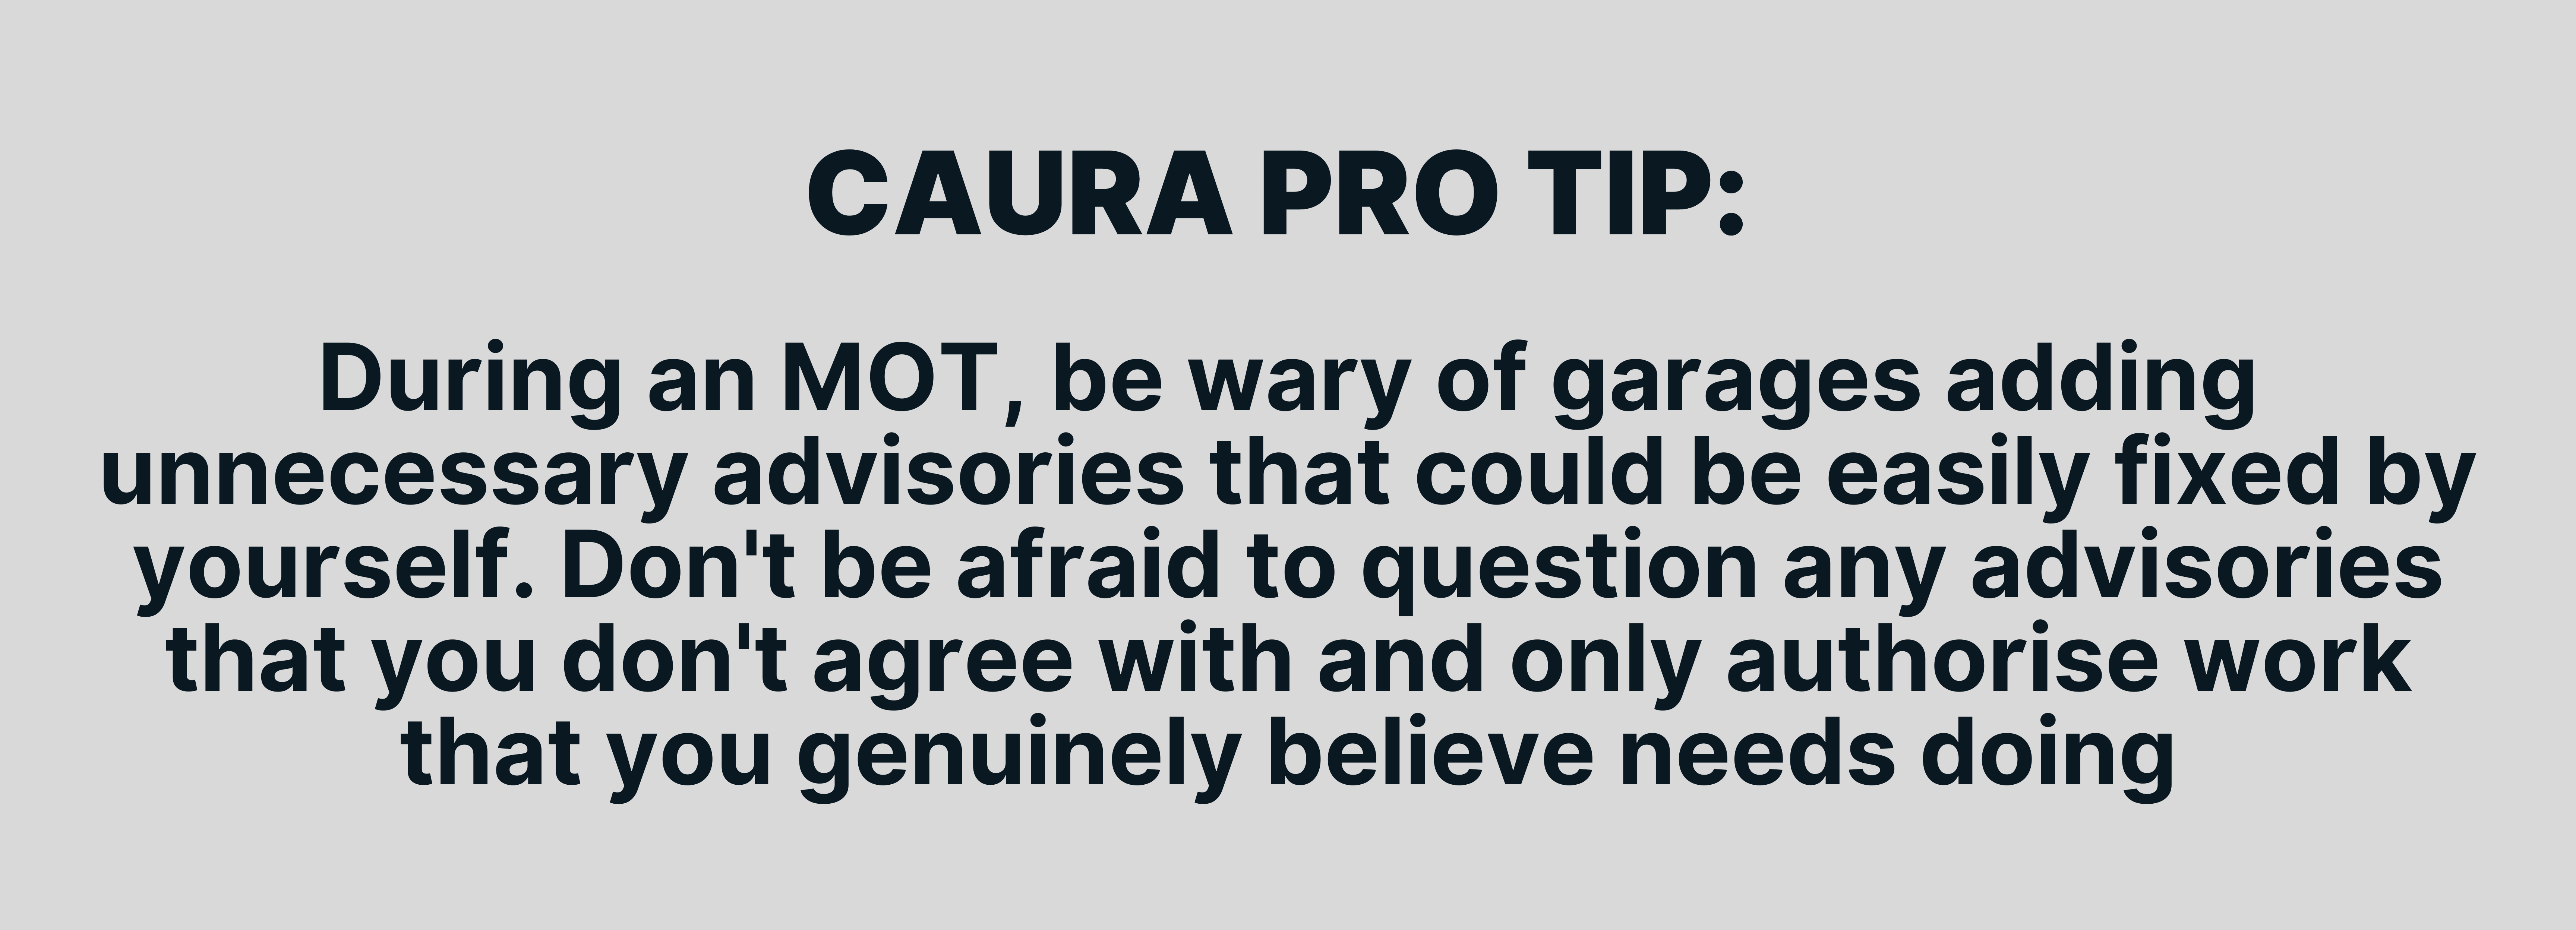 During an MOT, be wary of garages adding unnecessary advisories that could be easily fixed by yourself. Don't be afraid to question any advisories that you don't agree with and only authorise work that you genuinely believe needs doing.